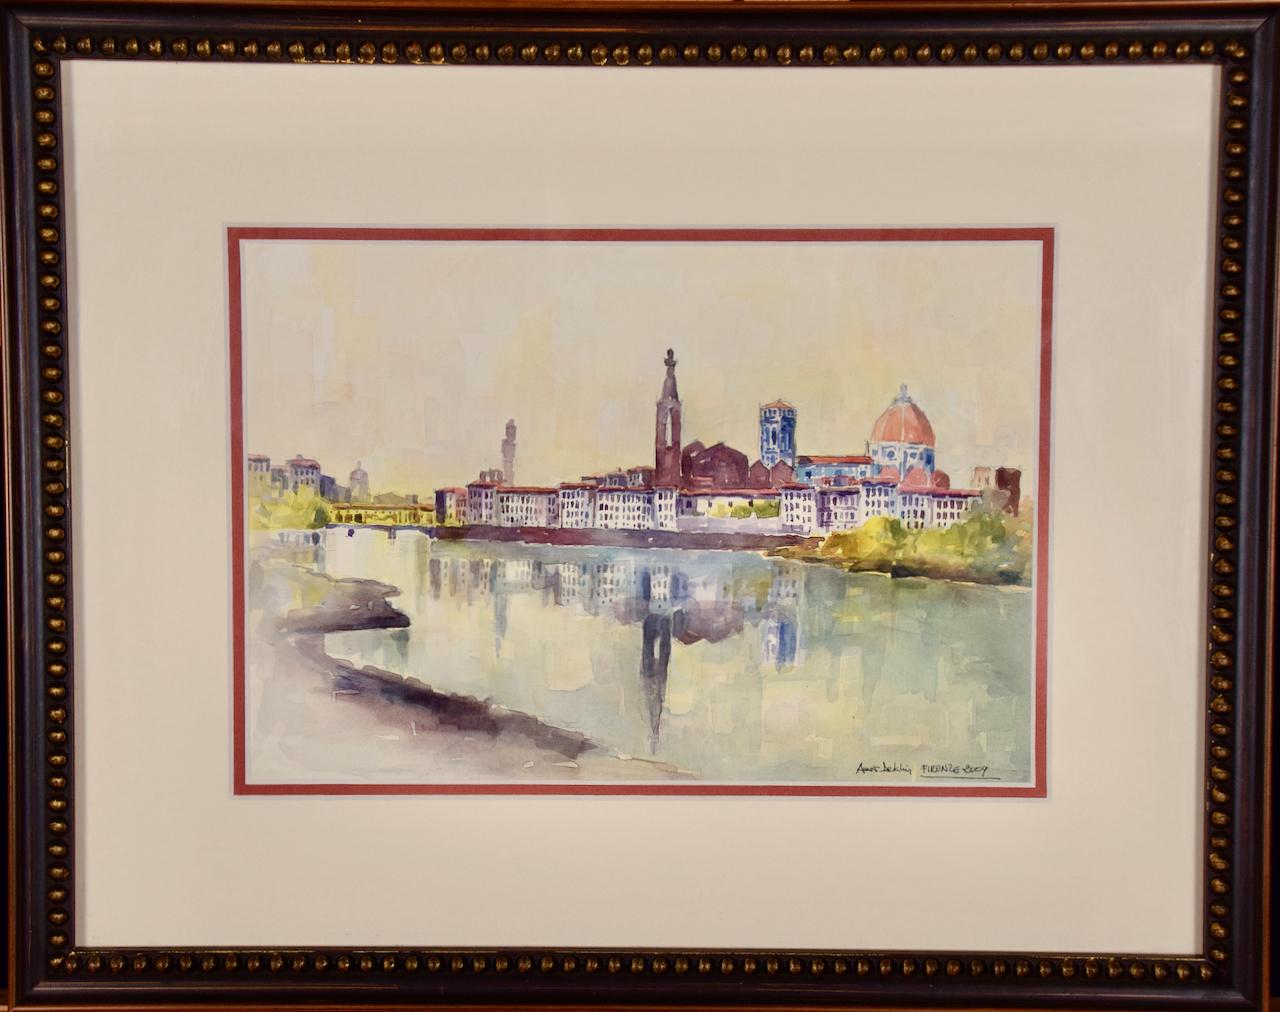 View of Florence (Firenze): Original framed watercolor painting by Amos Deklin